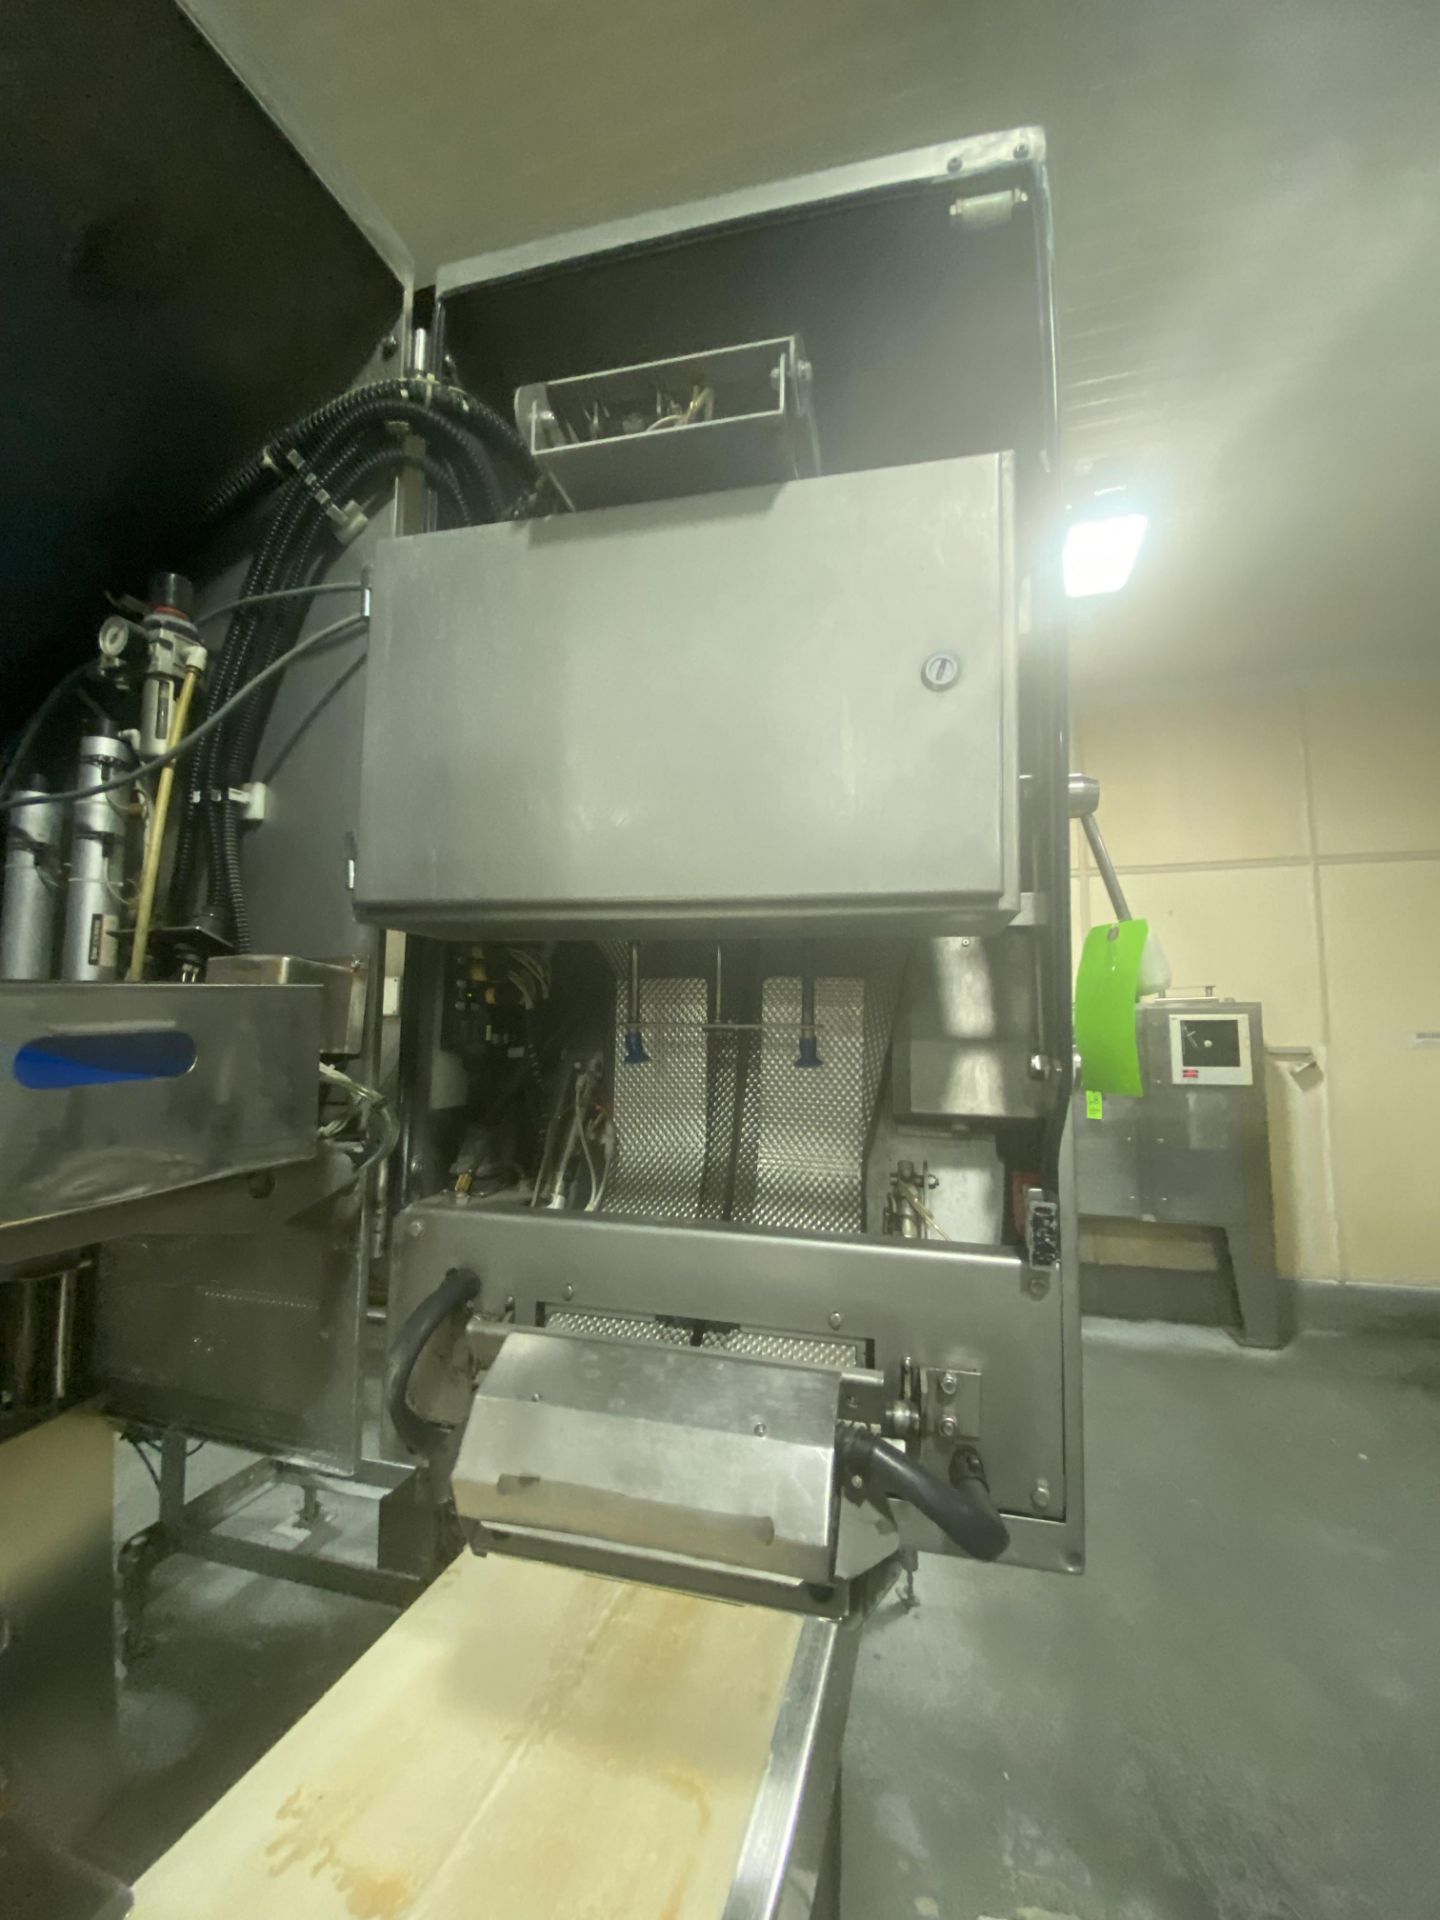 Stoelting (Relco)S/S Cheese Blocker with Cyrovac CL20 Bagger, M/N C120, S/N 01103, with - Image 3 of 12